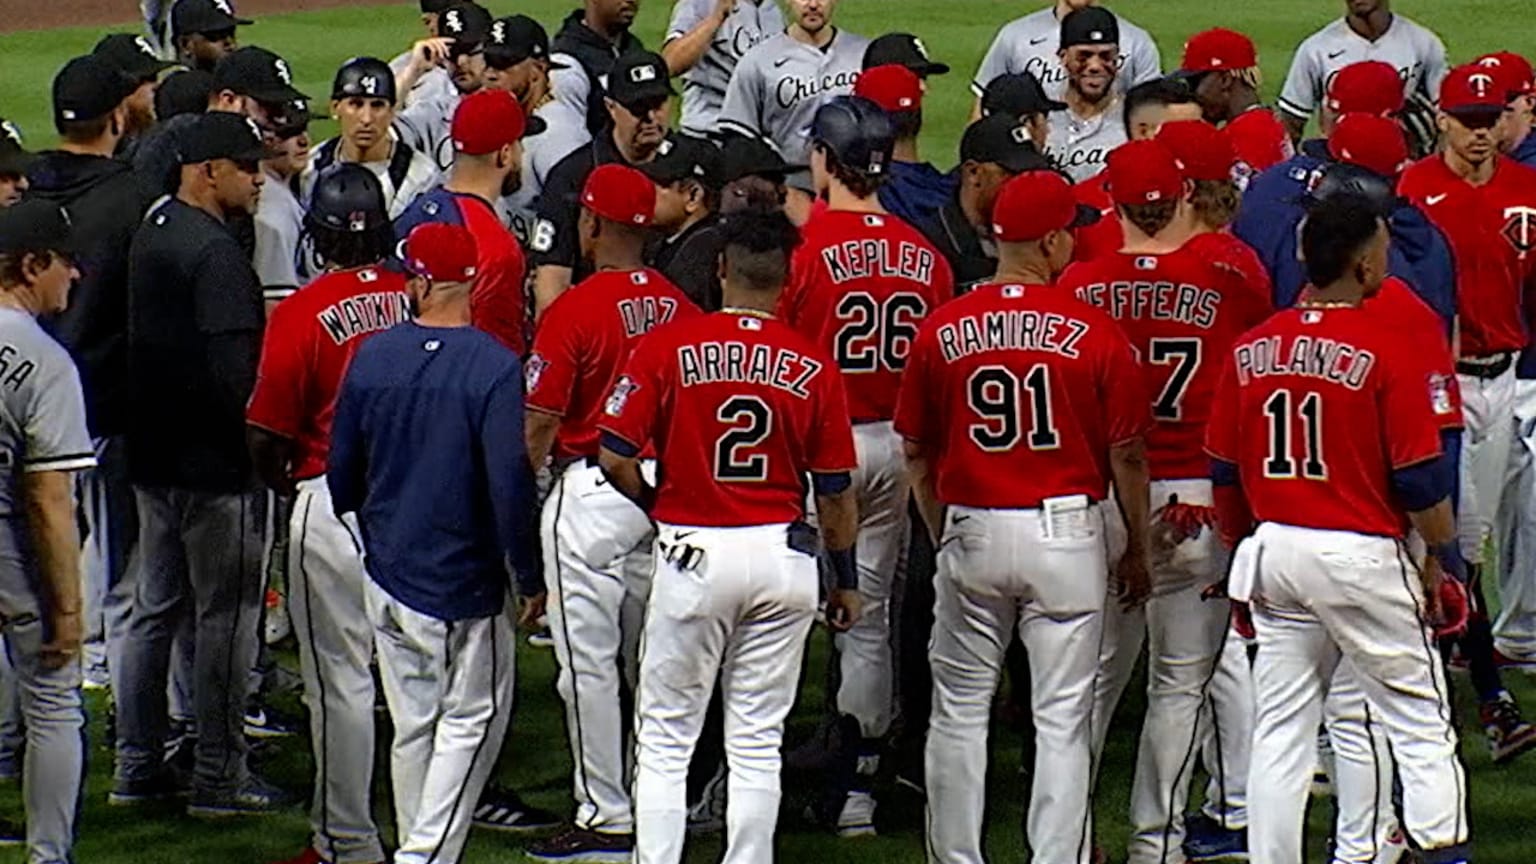 Benches clear after final out 07/14/2022